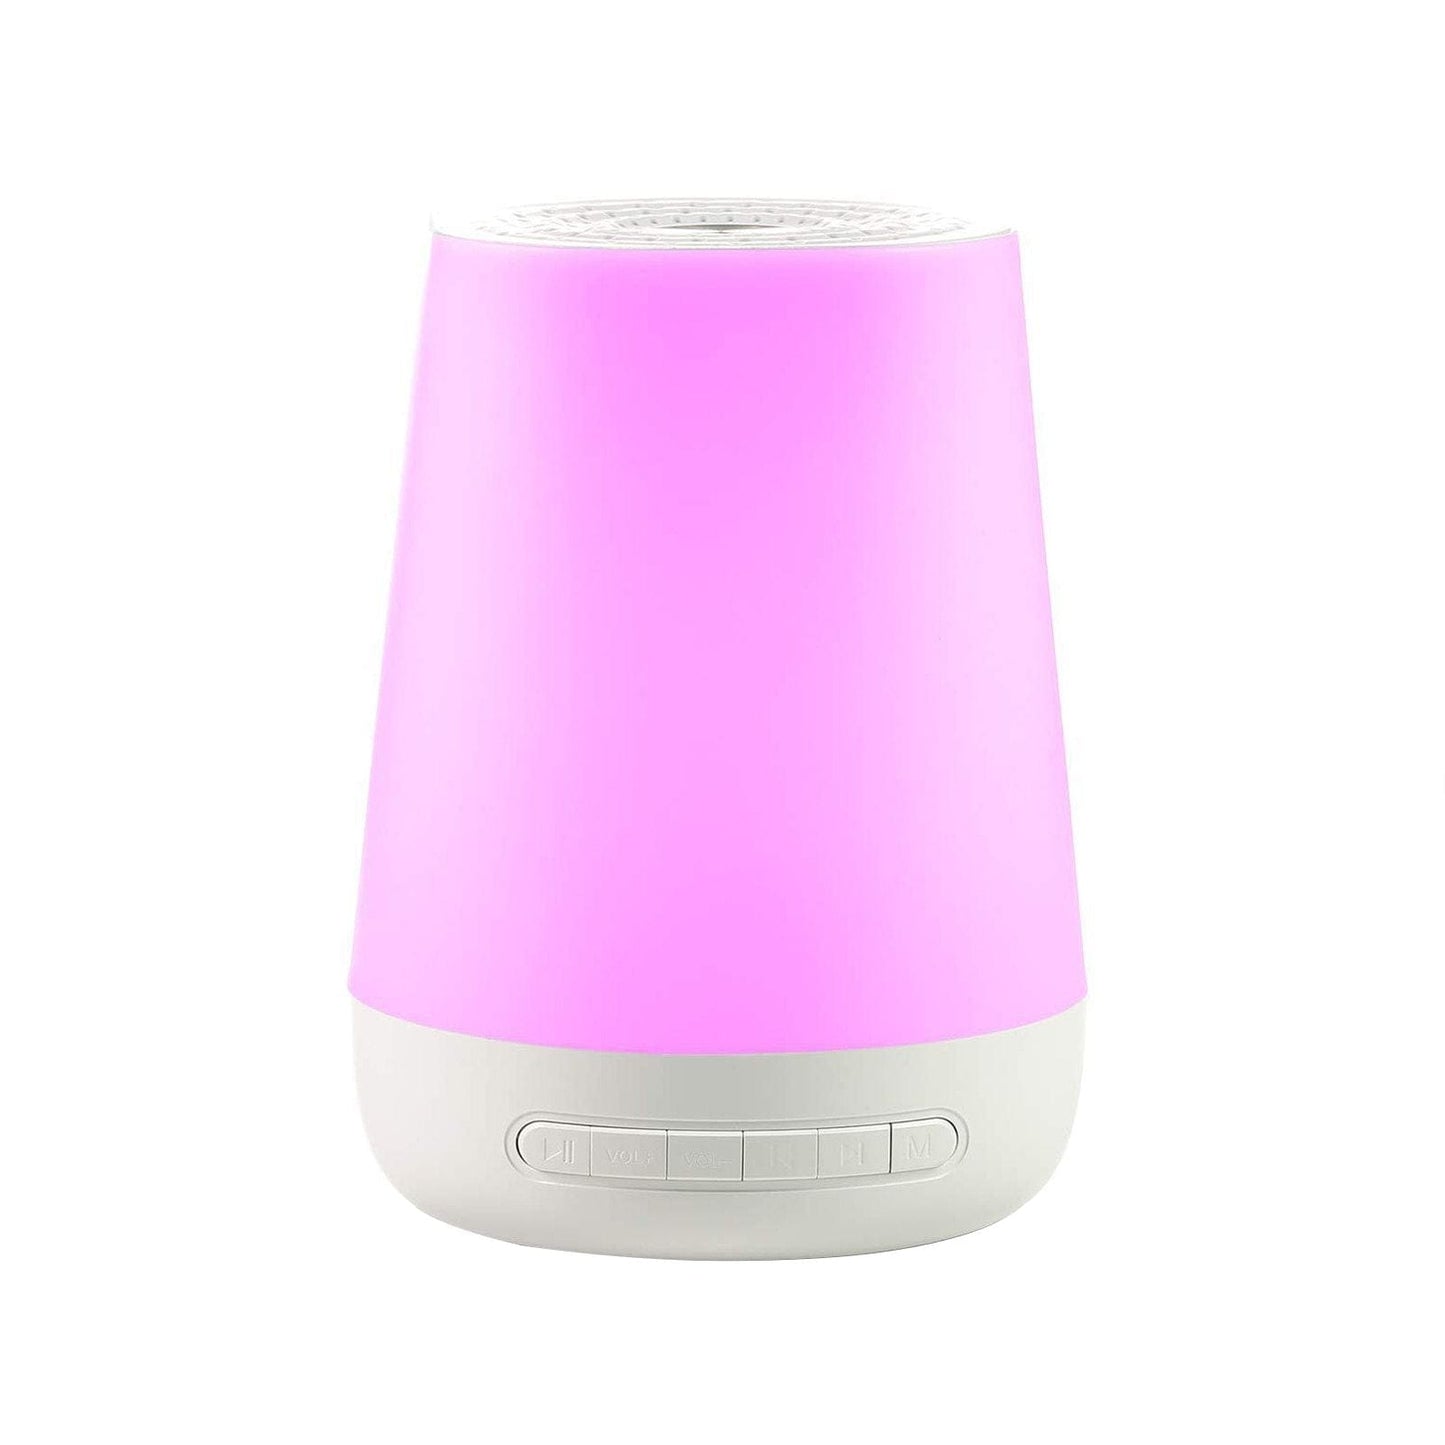 BabySoothe - Baby White Noise Machine Night Lamp